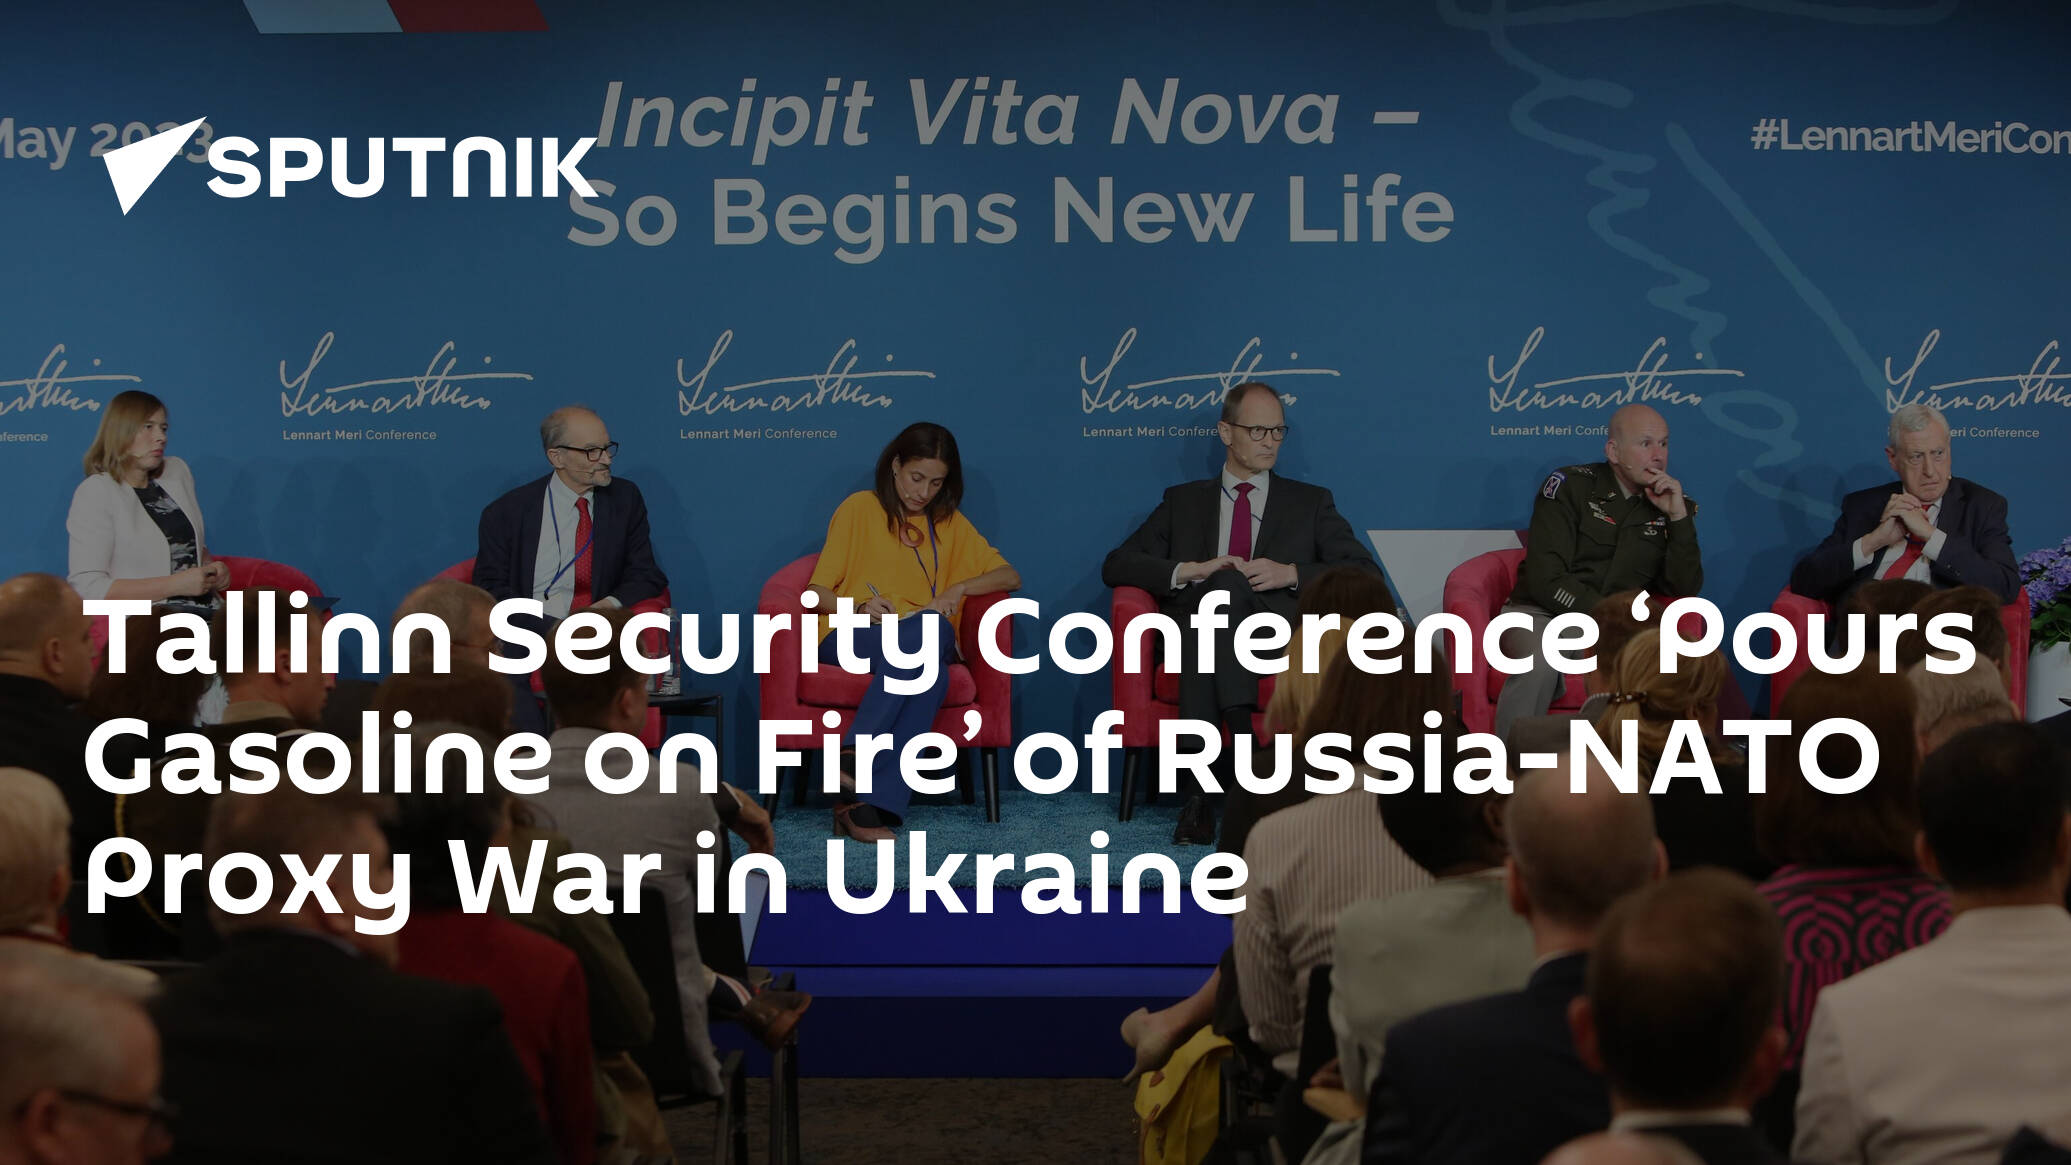 Tallinn Security Conference ‘Pours Gasoline on Fire’ of Russia-NATO Proxy War in Ukraine